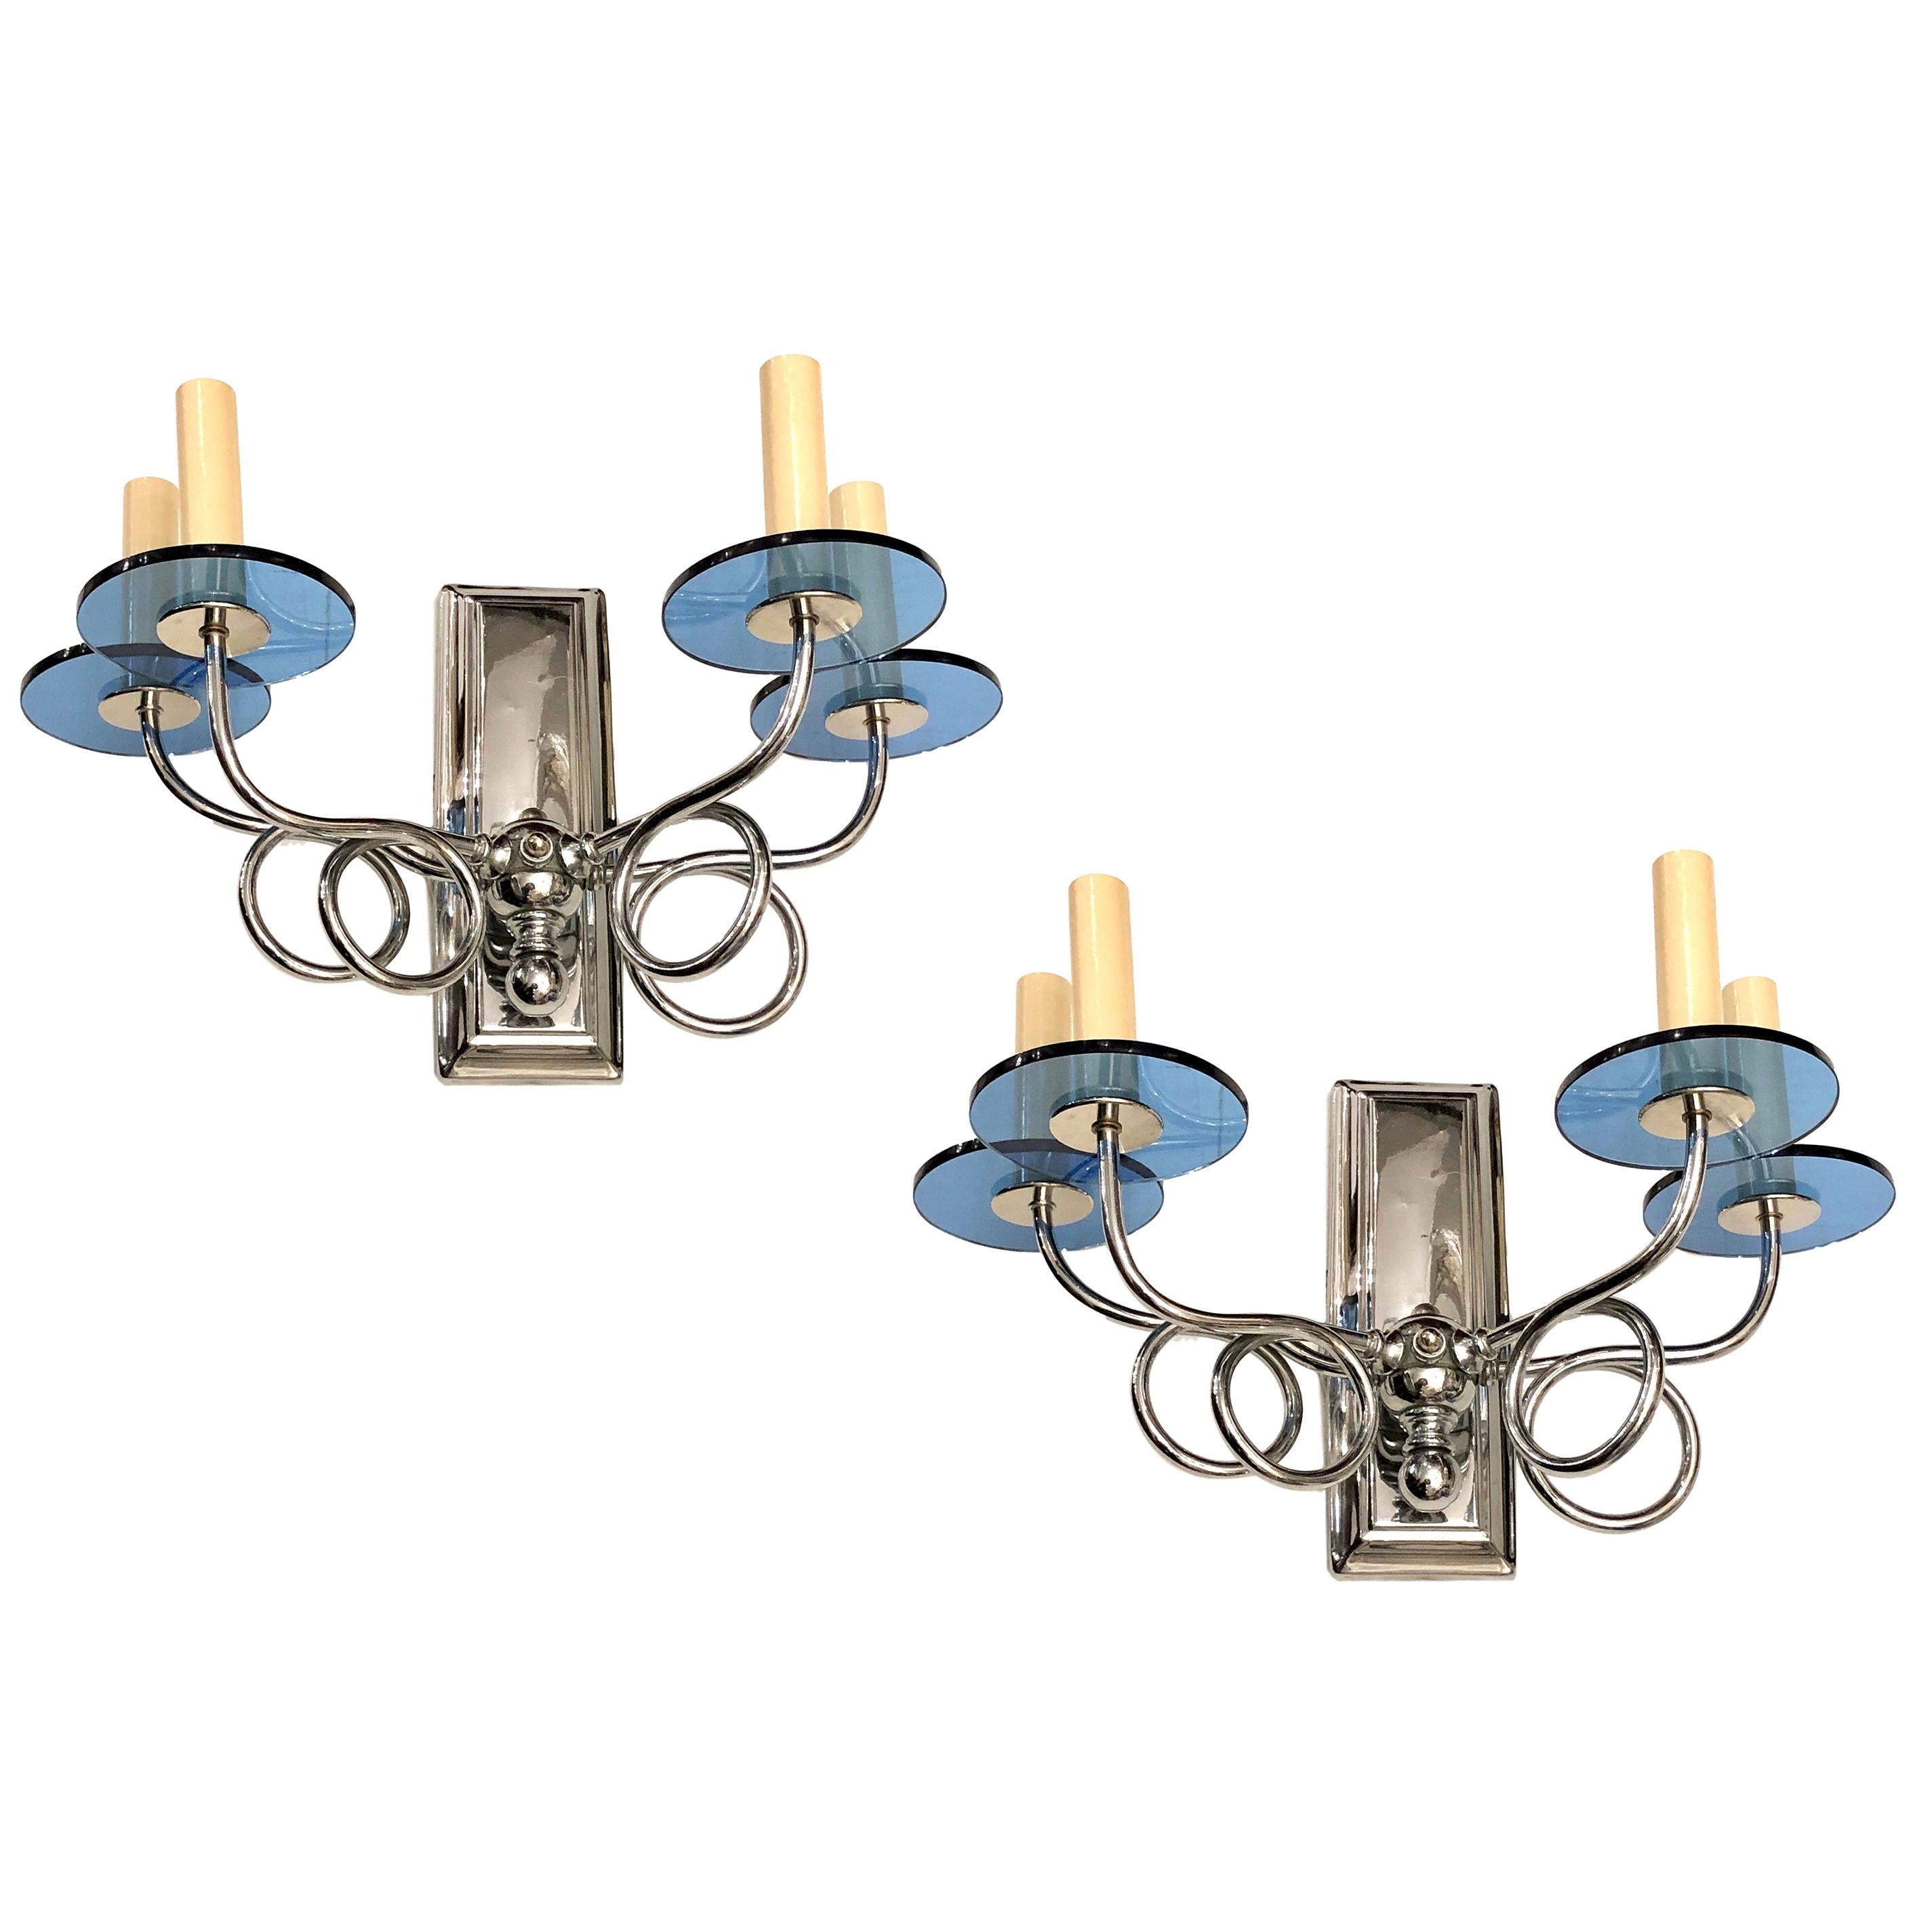 Pair of Midcentury Swirling Arm Sconces